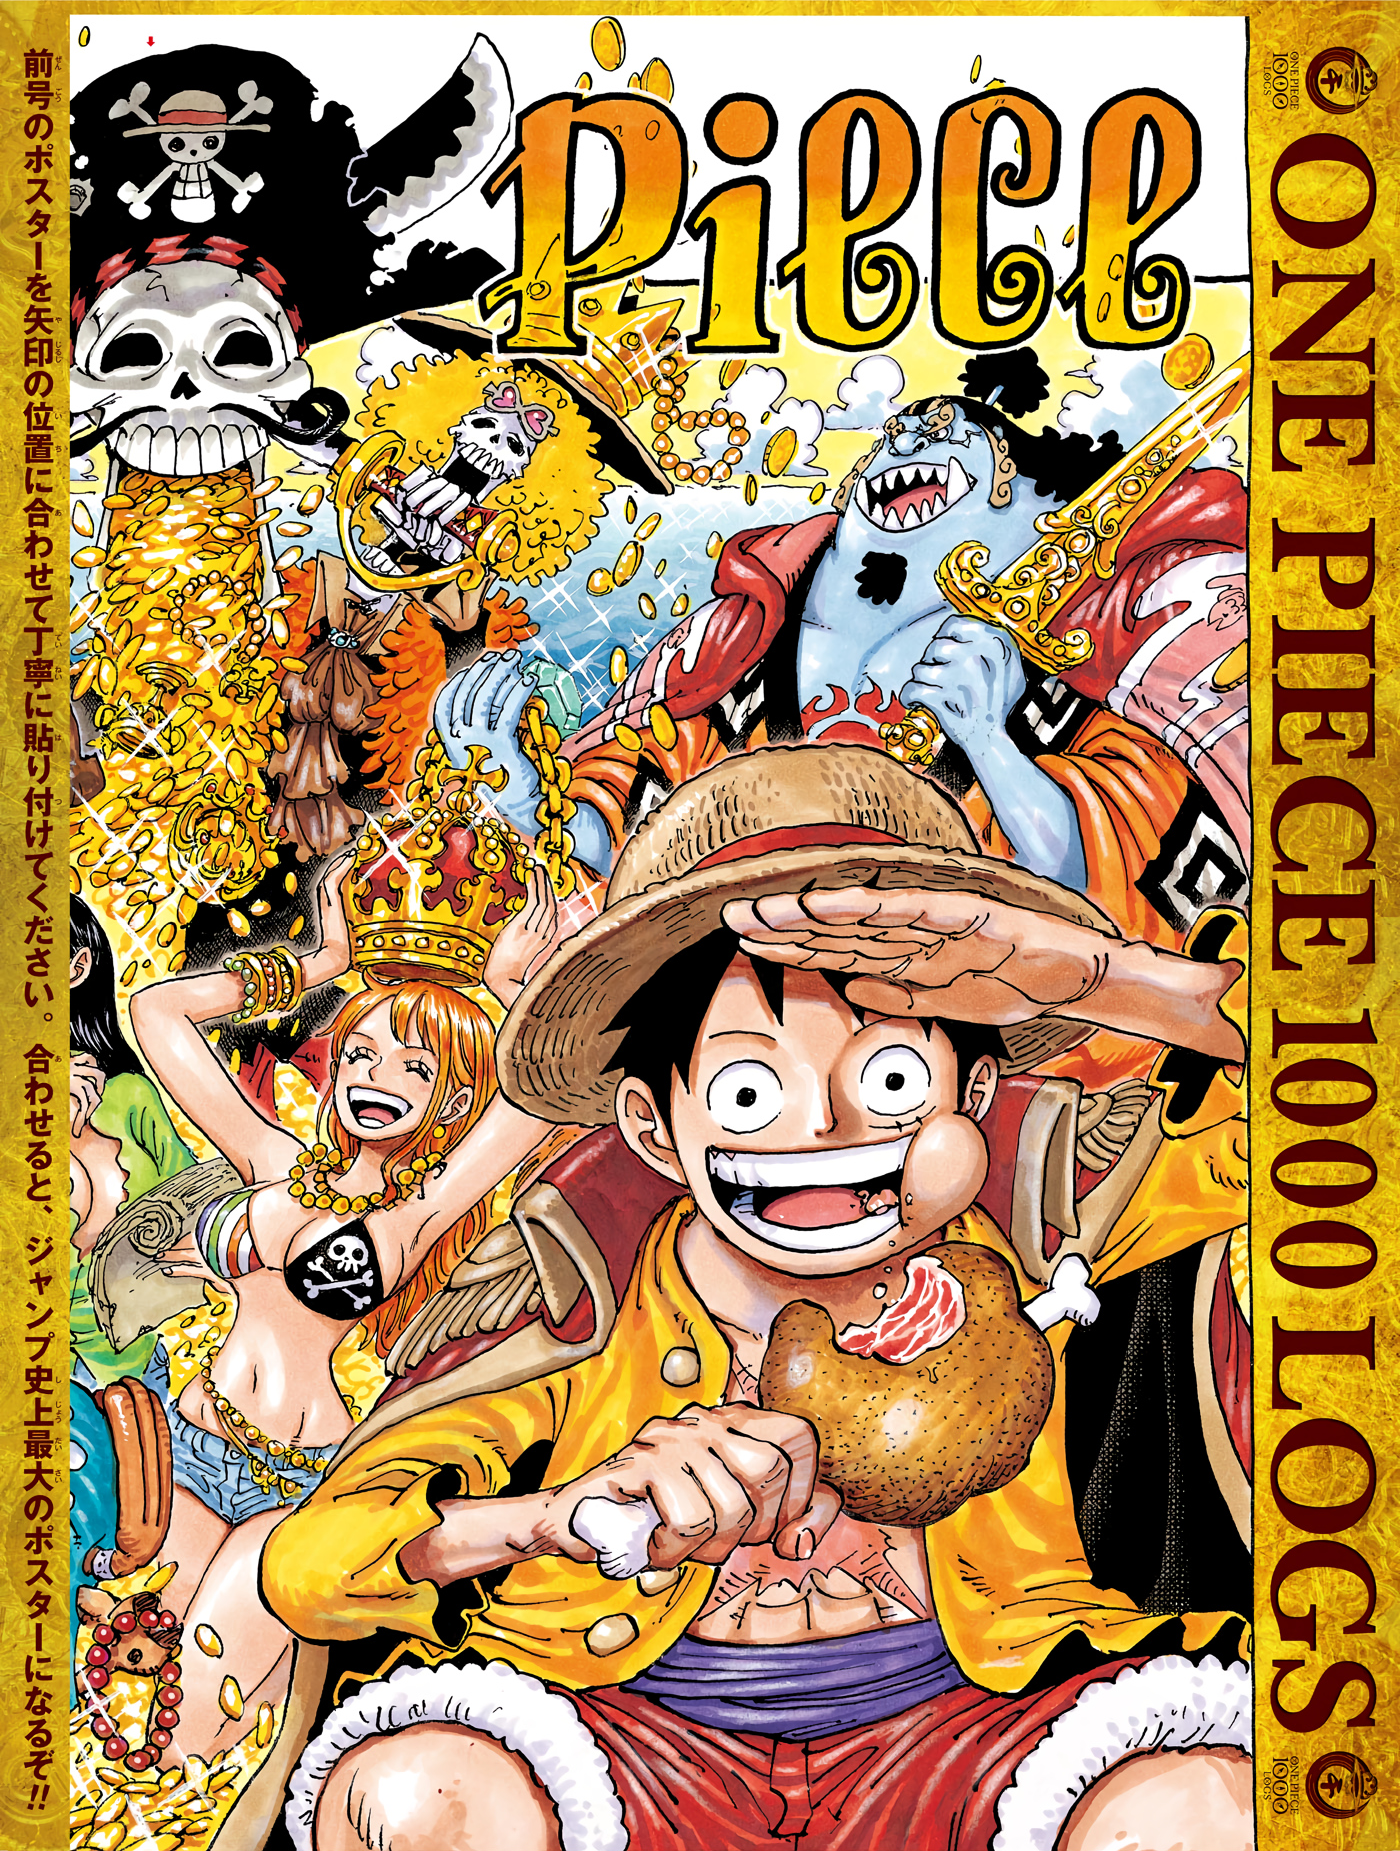 Chapter 1000. One Piece Wiki. One piece chapter, Manga anime one piece, One piece drawing